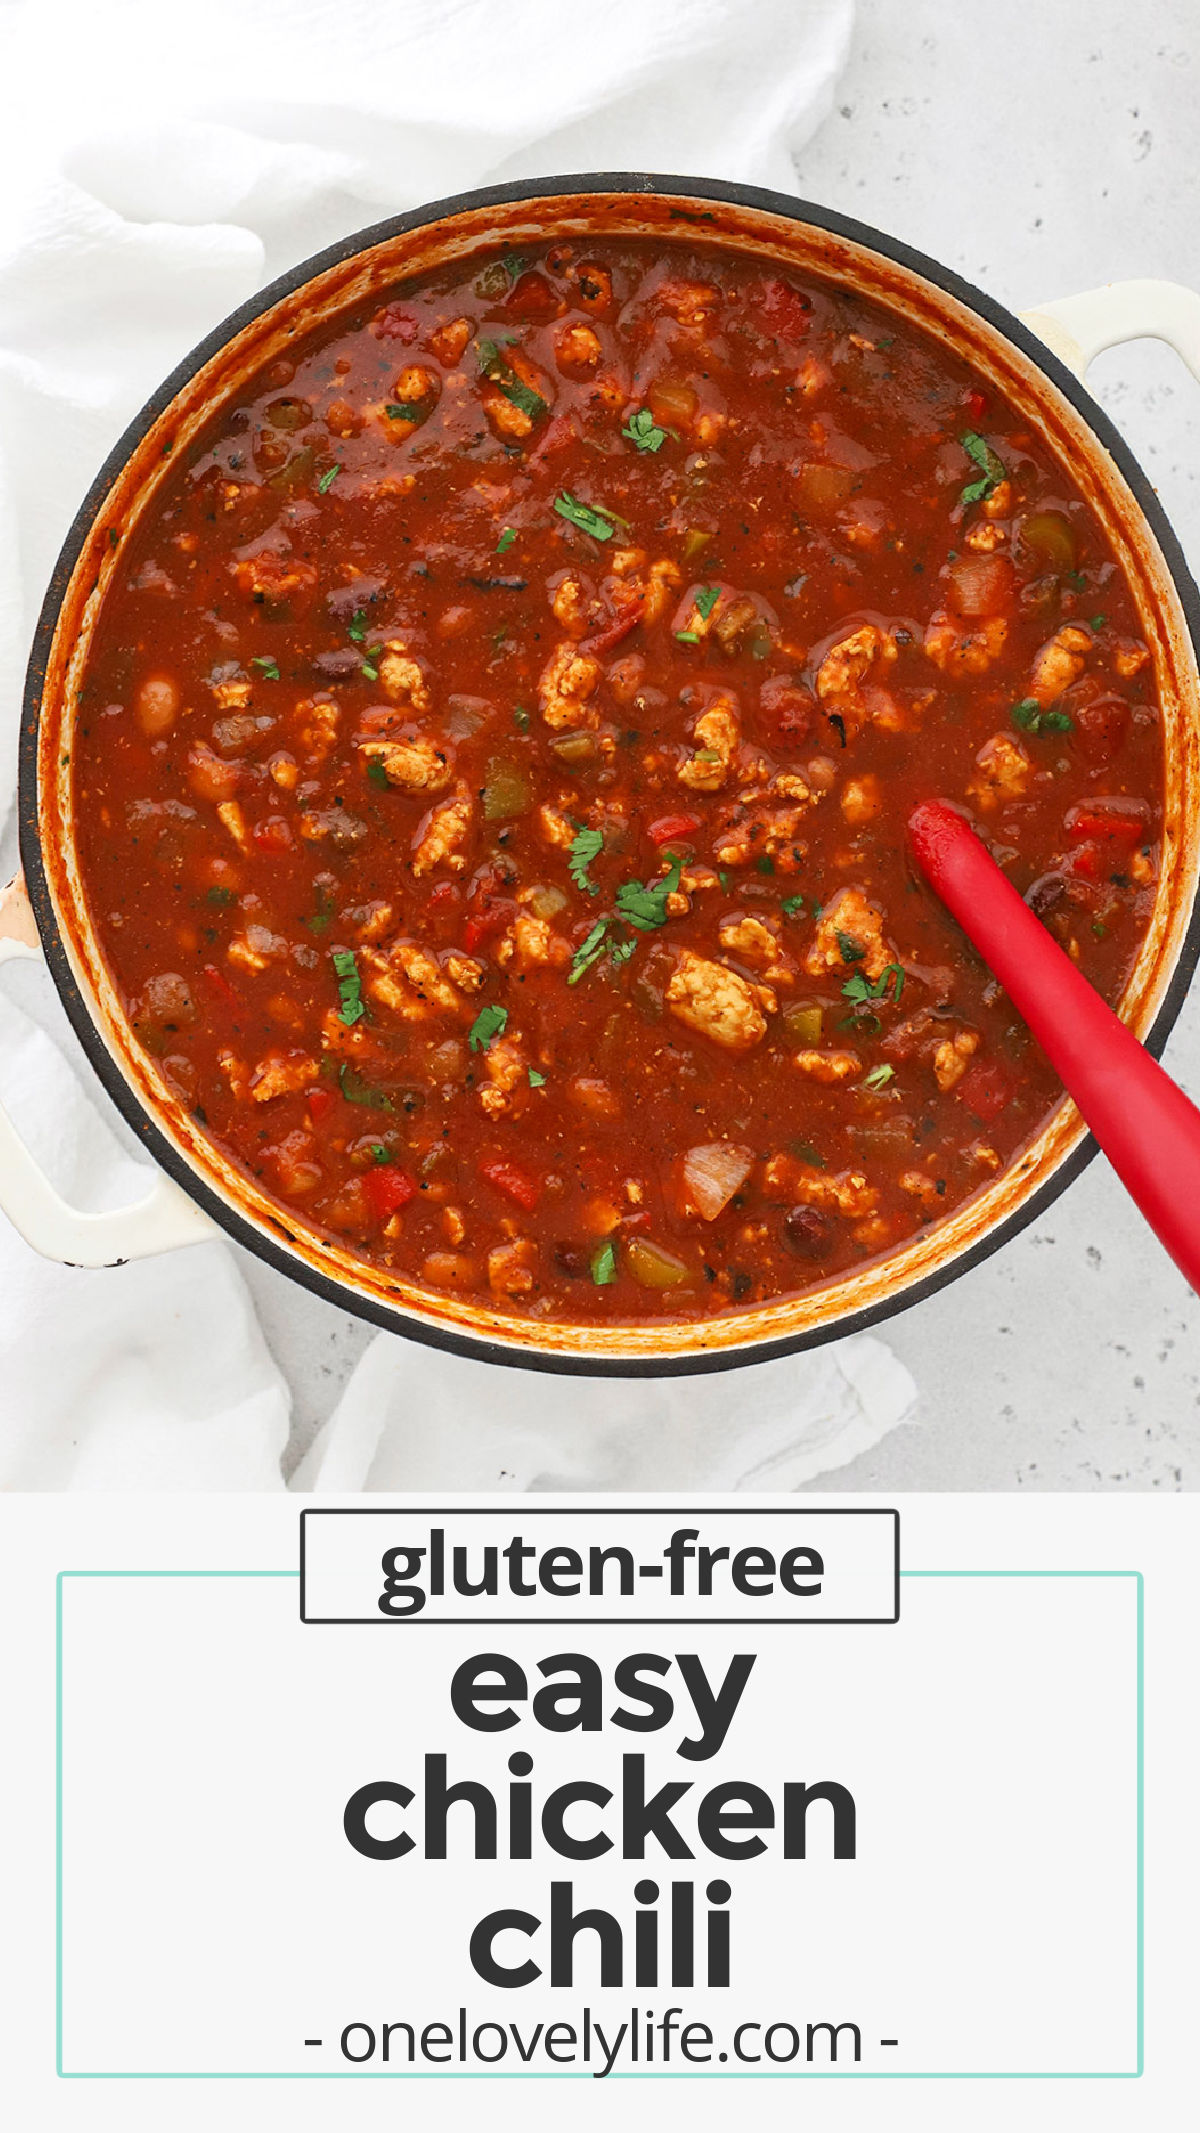 Easy Chicken Chili - this easy ground chicken chili recipe is FULL of bold flavor in every bite. It's packed with lean protein, and freezes like a dream! // the best ground chicken chili // high protein chili / easy chili recipe / low fat chili recipe / gluten free chili / chili with ground chicken / chili with chicken / healthy chicken chili / healthy chili recipe